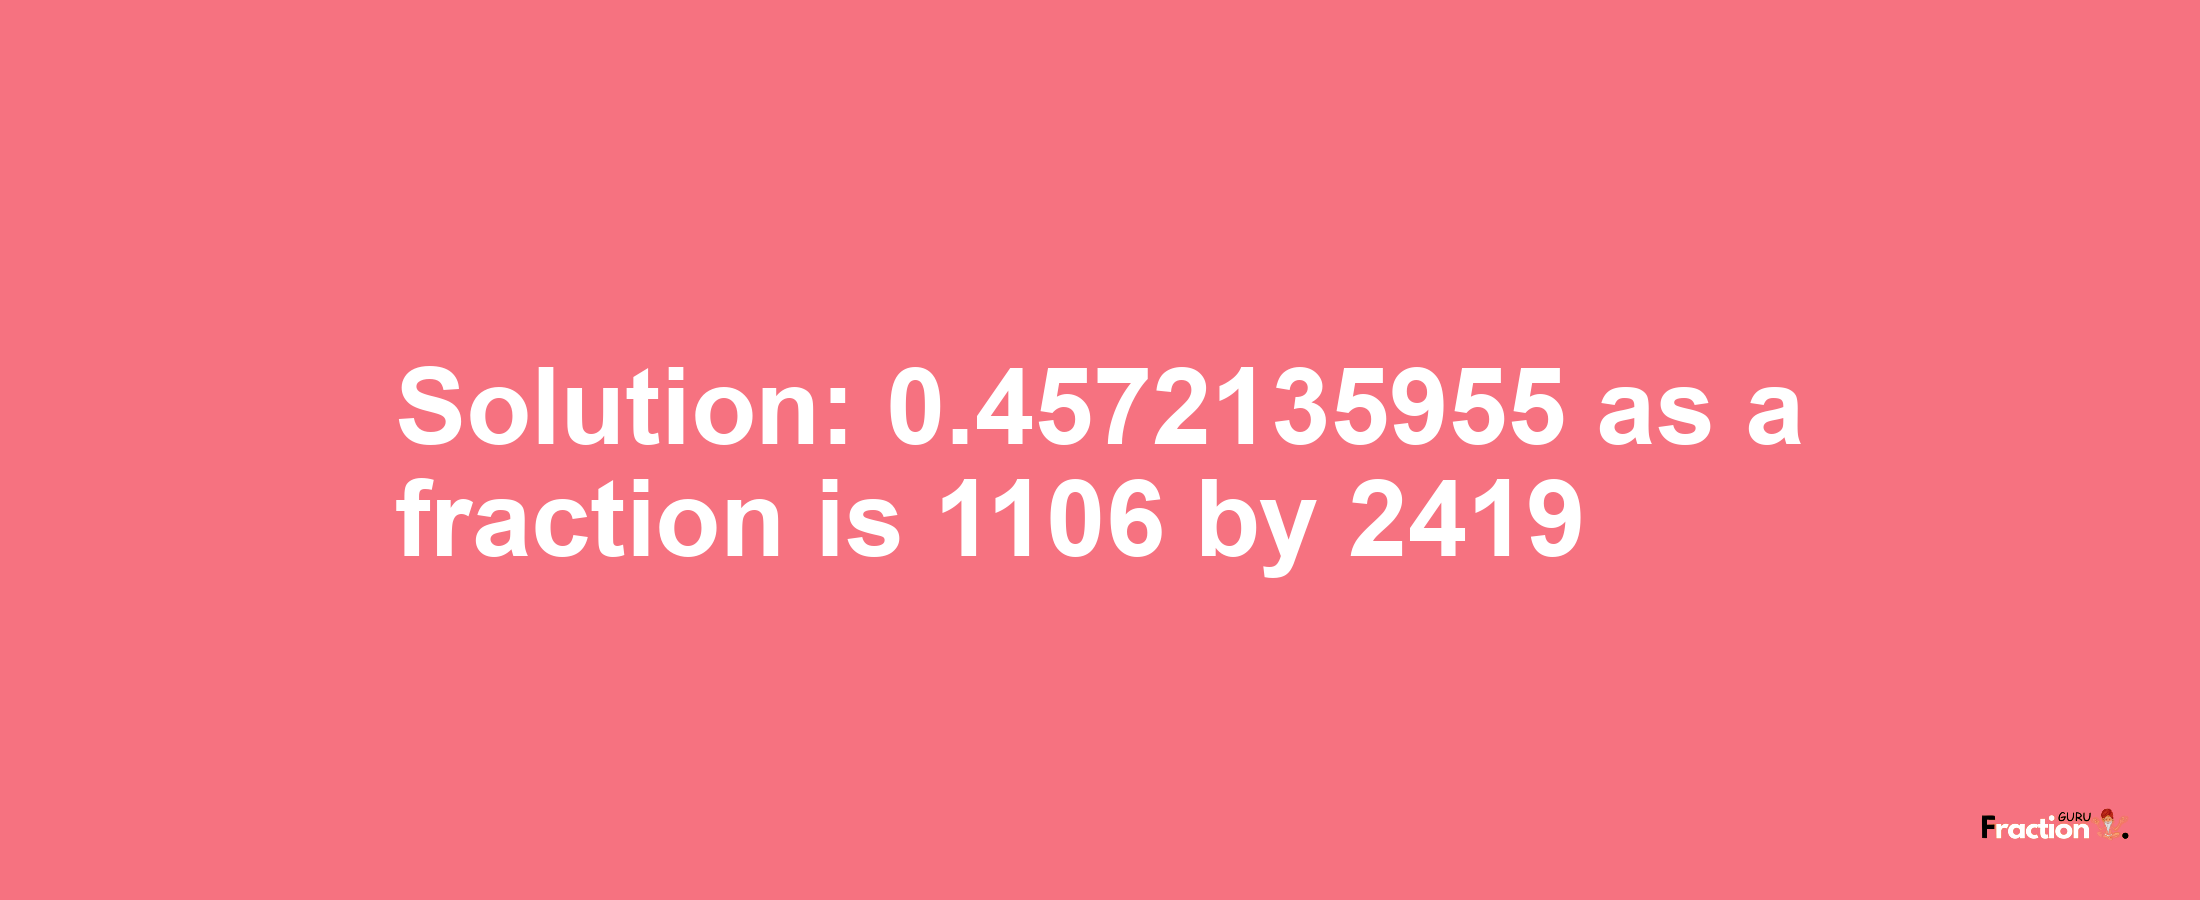 Solution:0.4572135955 as a fraction is 1106/2419